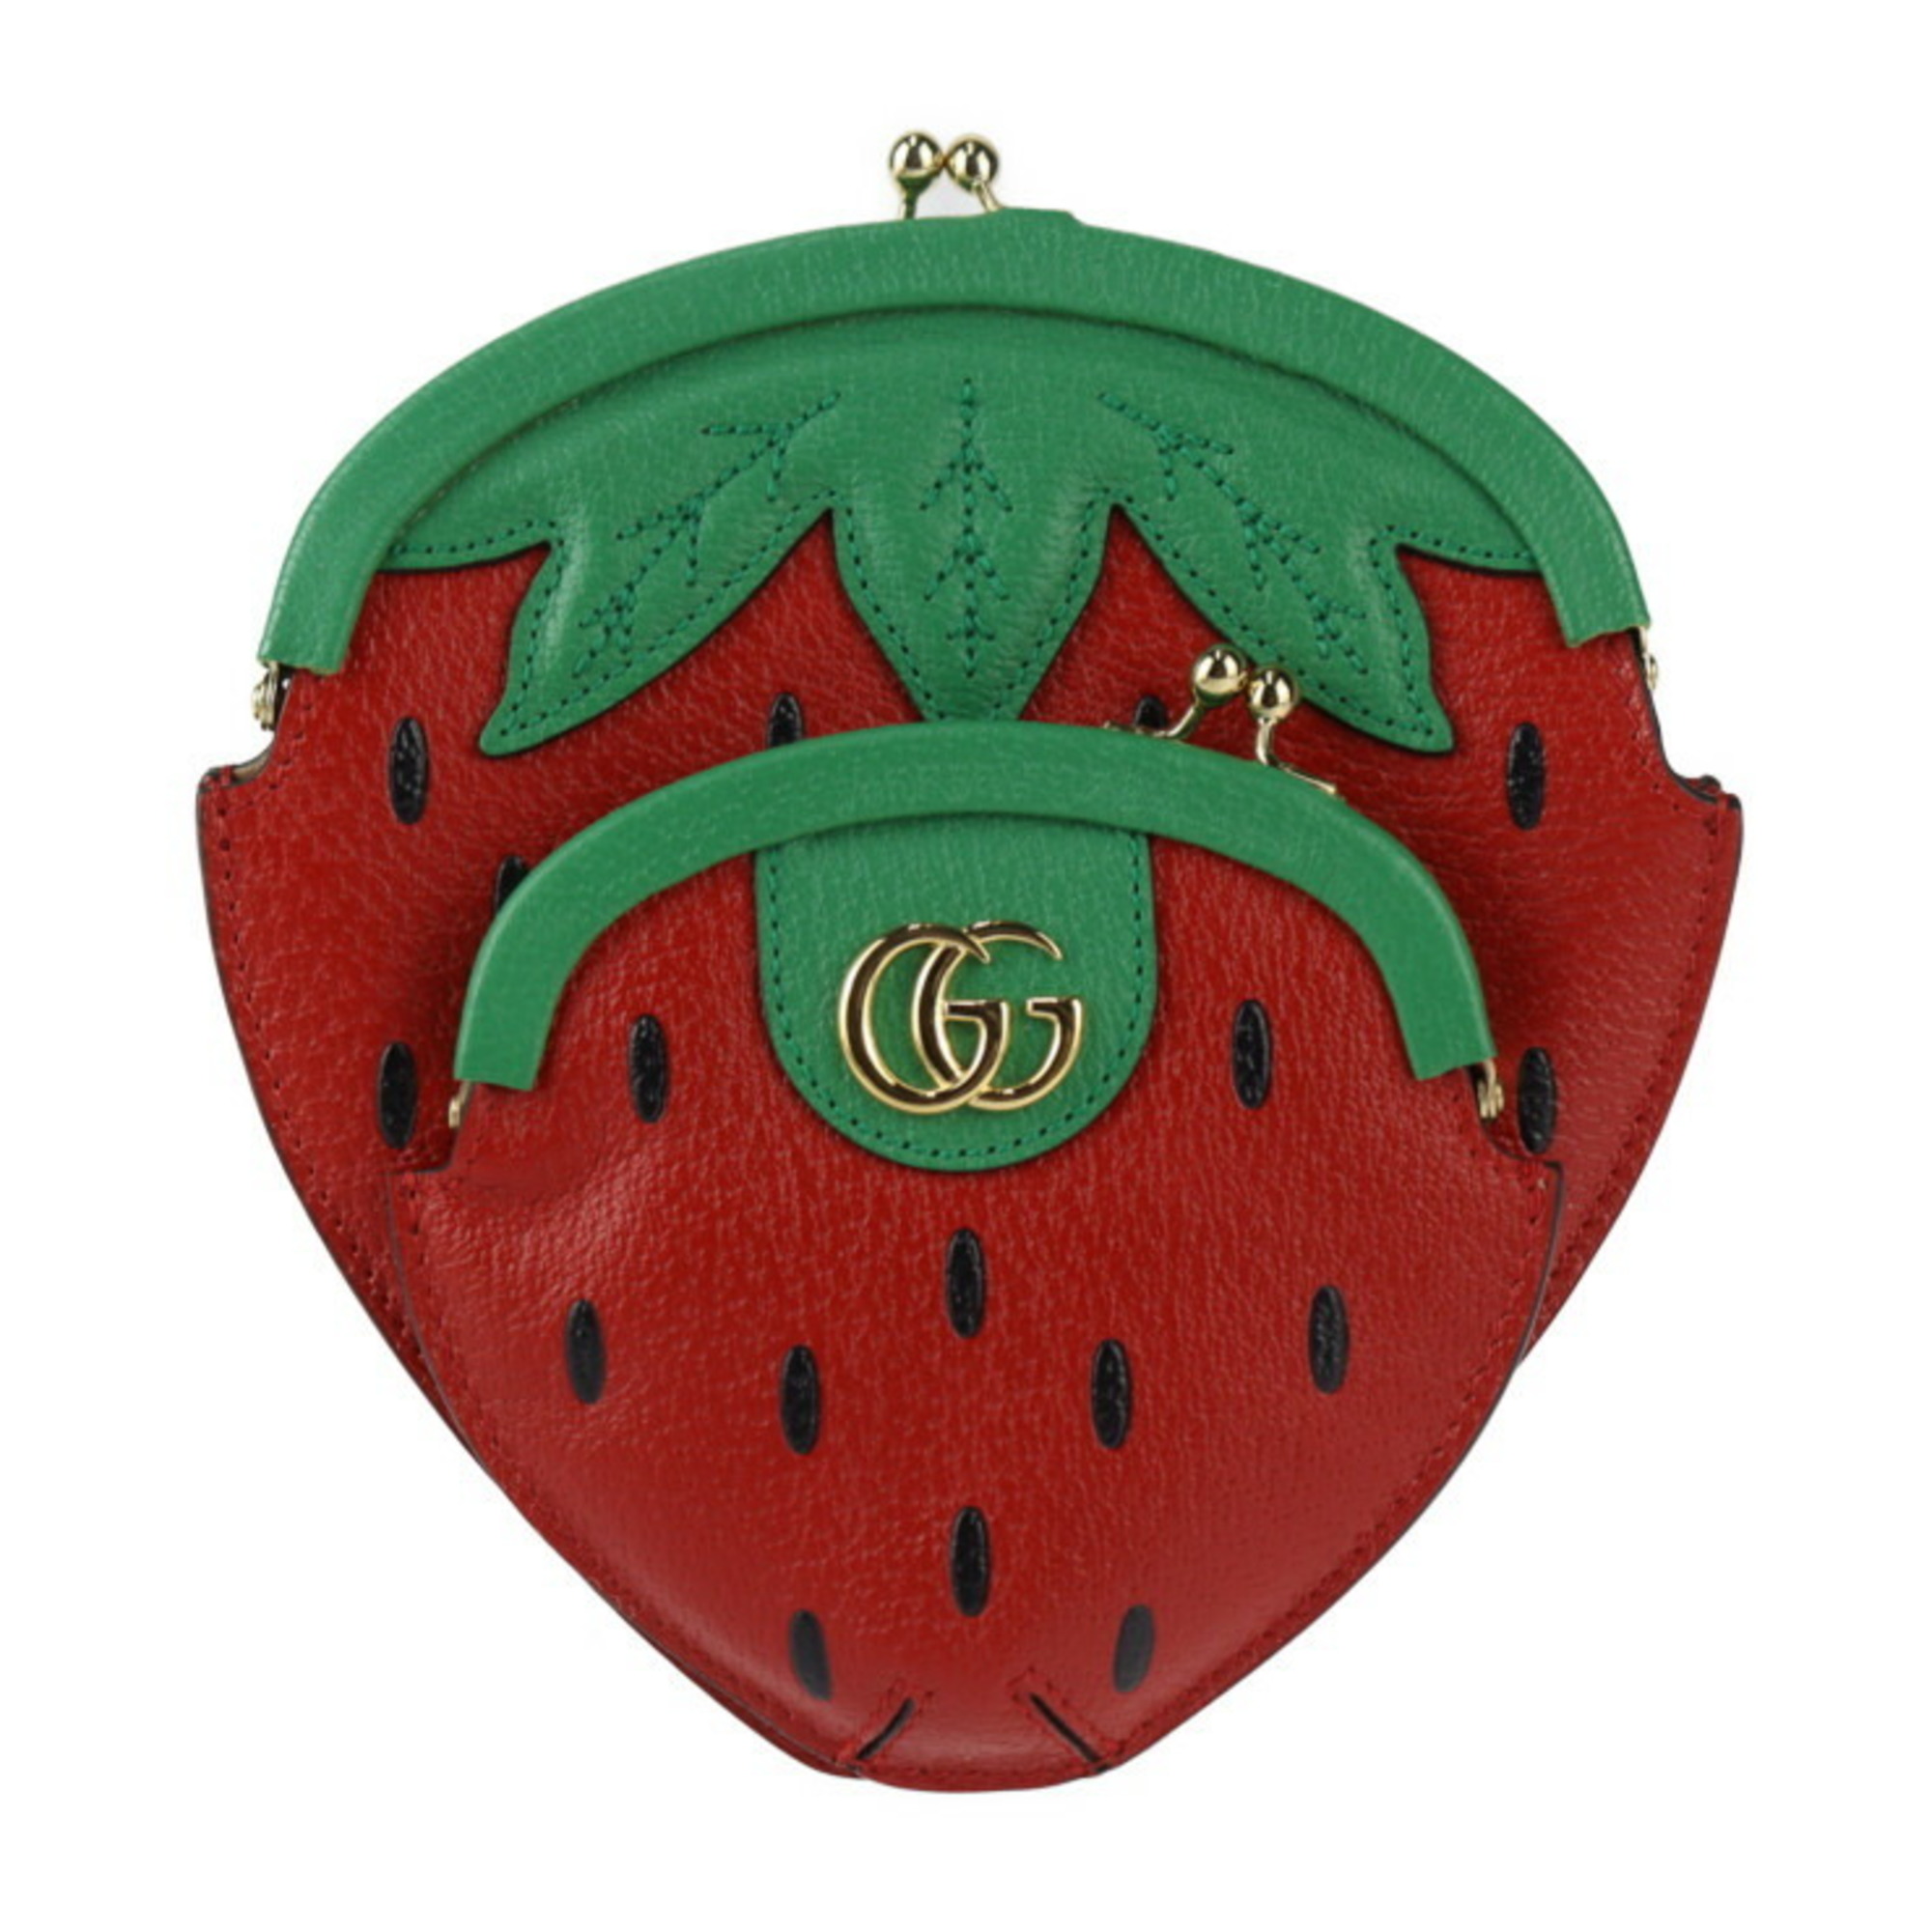 GUCCI Strawberry-shaped pochette shoulder bag 719725 Leather Red Green Strawberry Chain